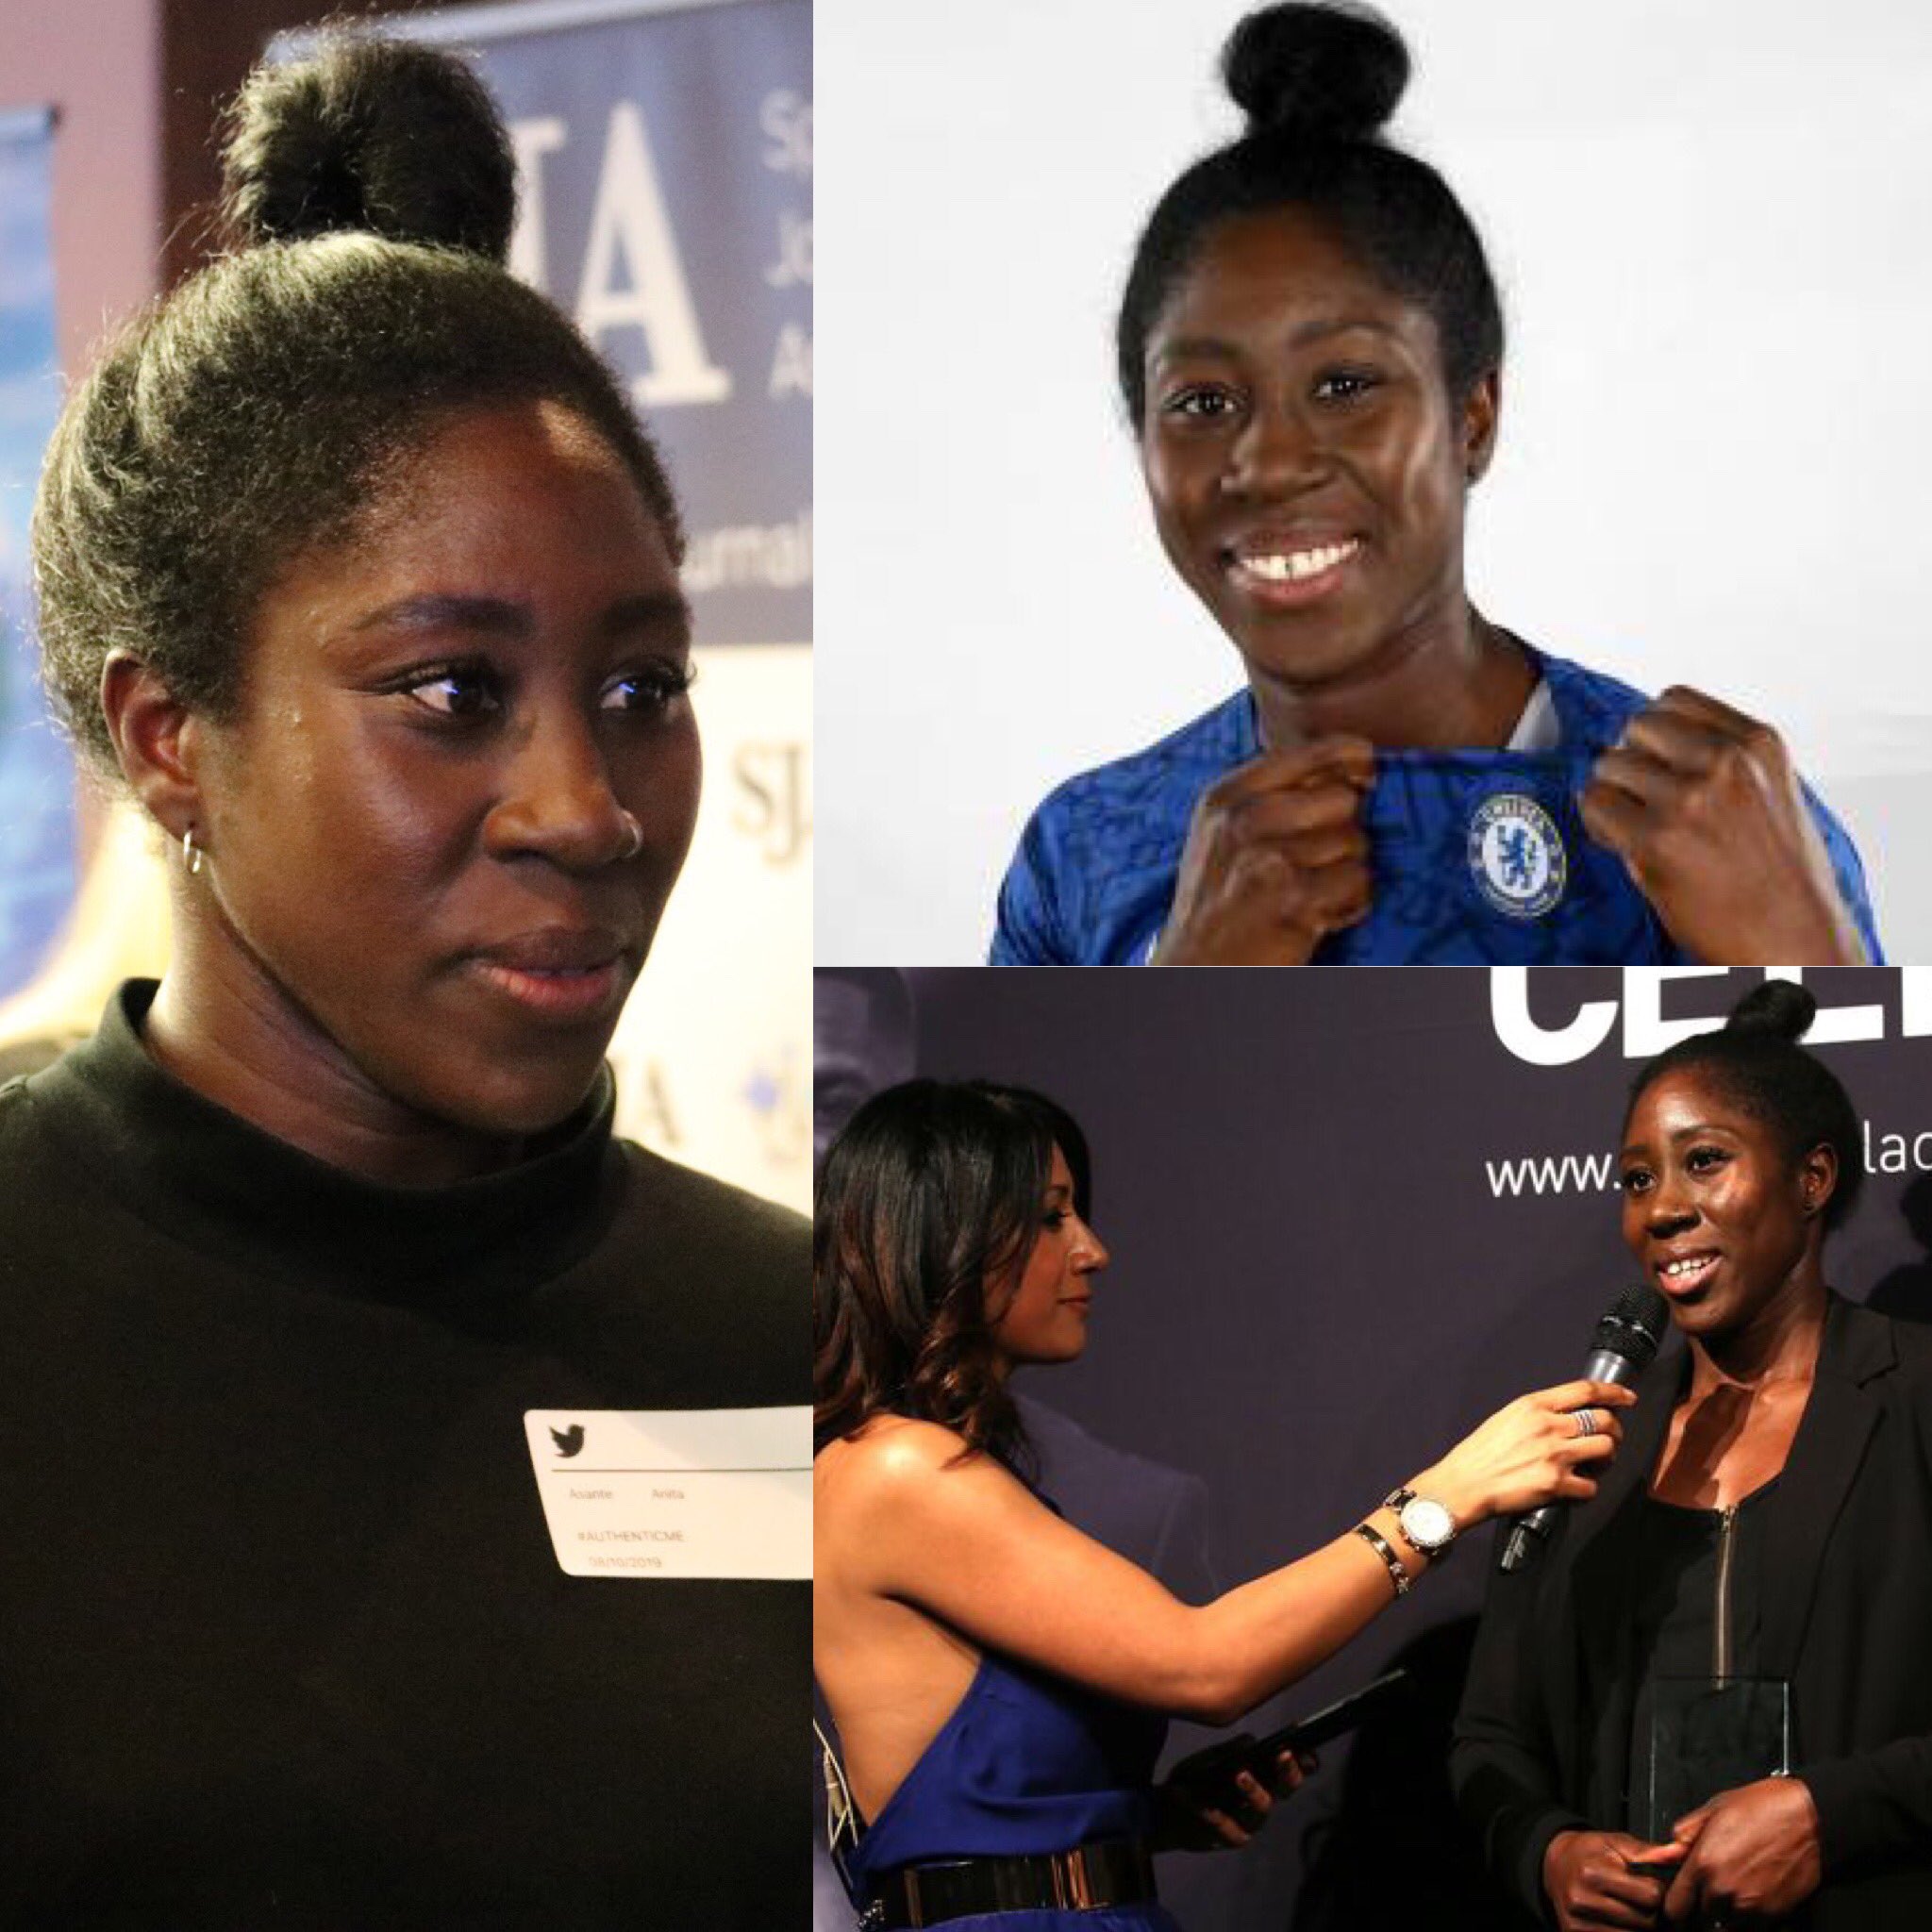 Sports Media LGBT+ on X: A big happy birthday to @Lionesses legend Anita  Asante! 🎈🎂🎉 Hope you have an awesome day @NicenNeetz and get spoilt  rotten 🙂 ICYMI last week, read Neetz's